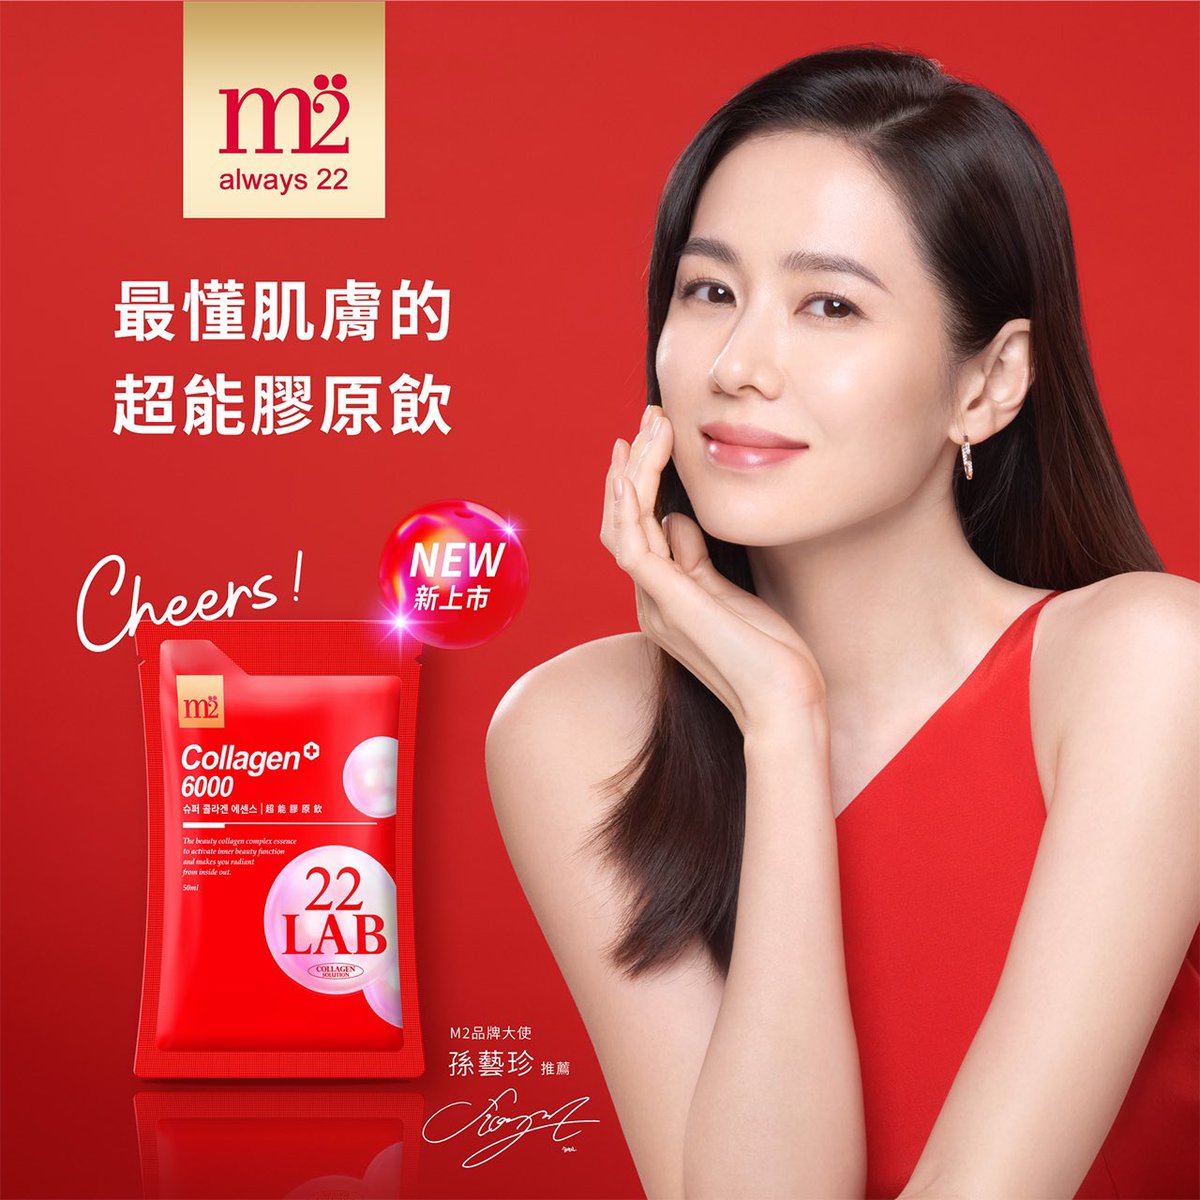 CHEERS TO THE M2 COLLAGEN
THE PRETTY AS EVER MUSE.♥️
#SonYeJin